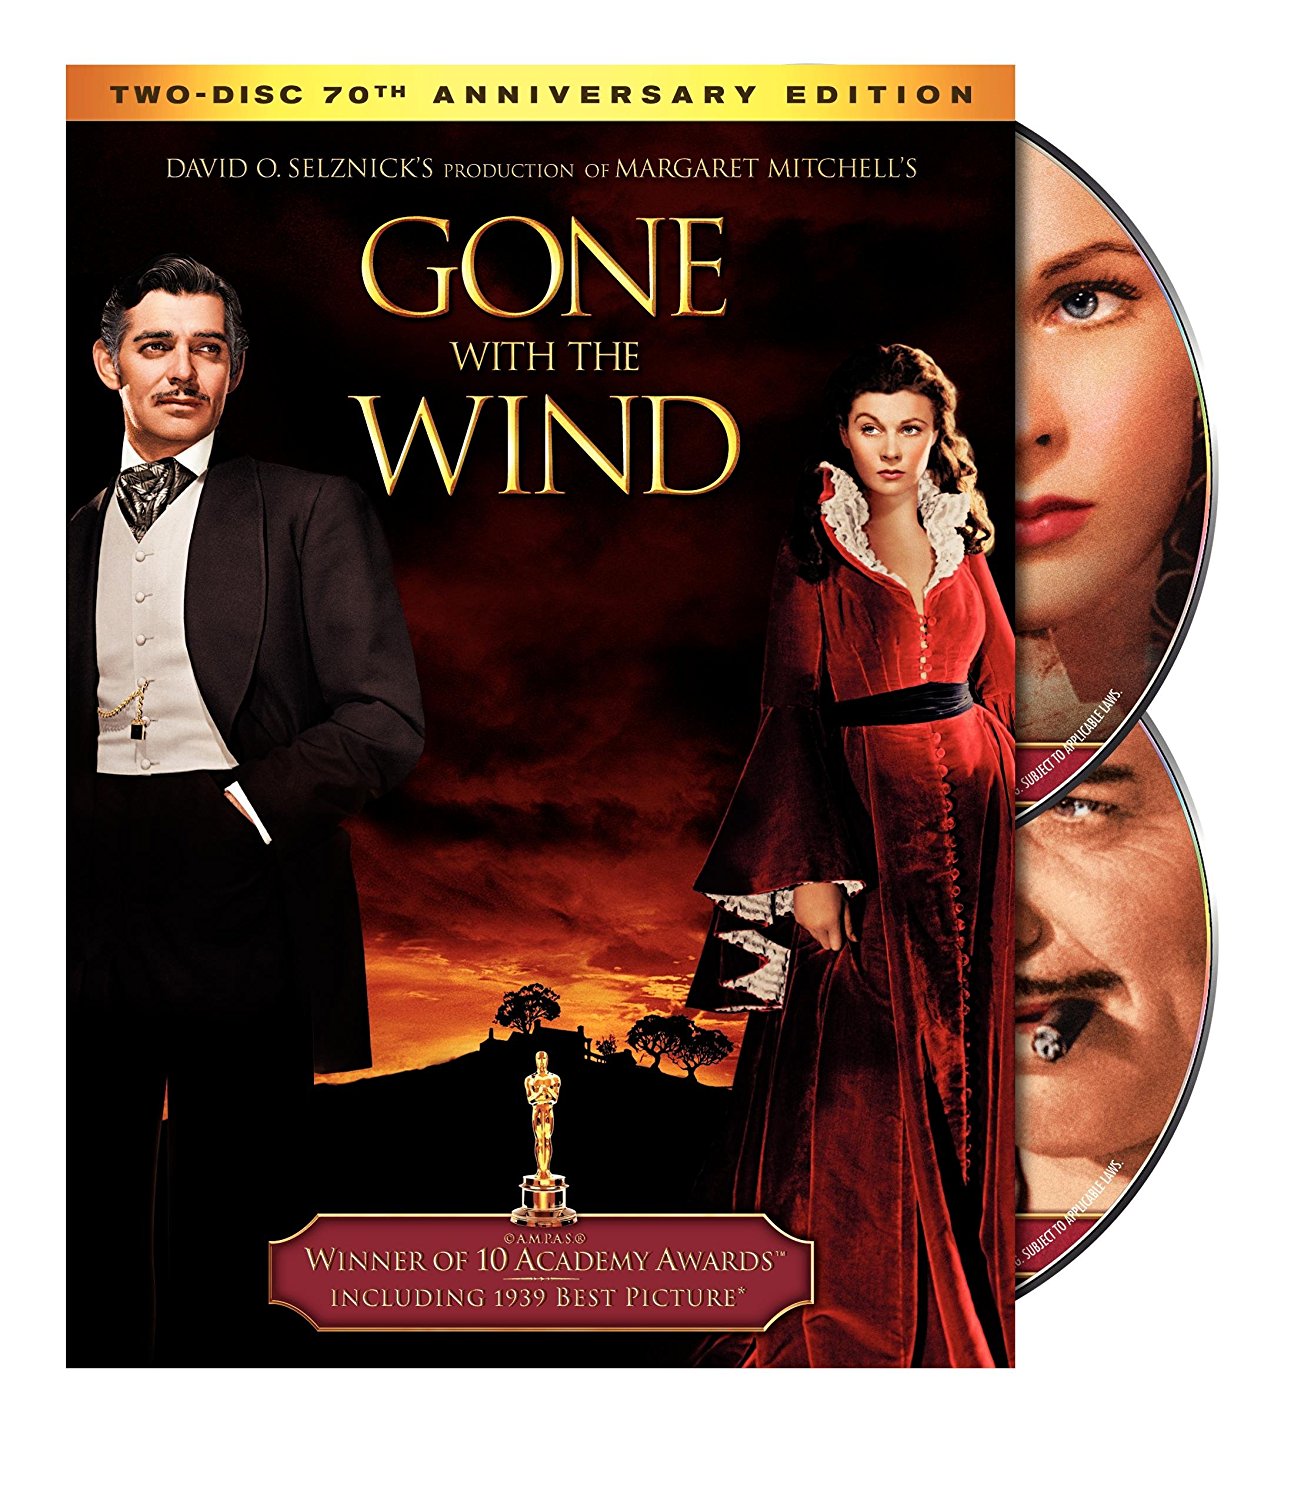 Amazon.com: Gone with the Wind (Two Disc 70th Anniversary Edition ...